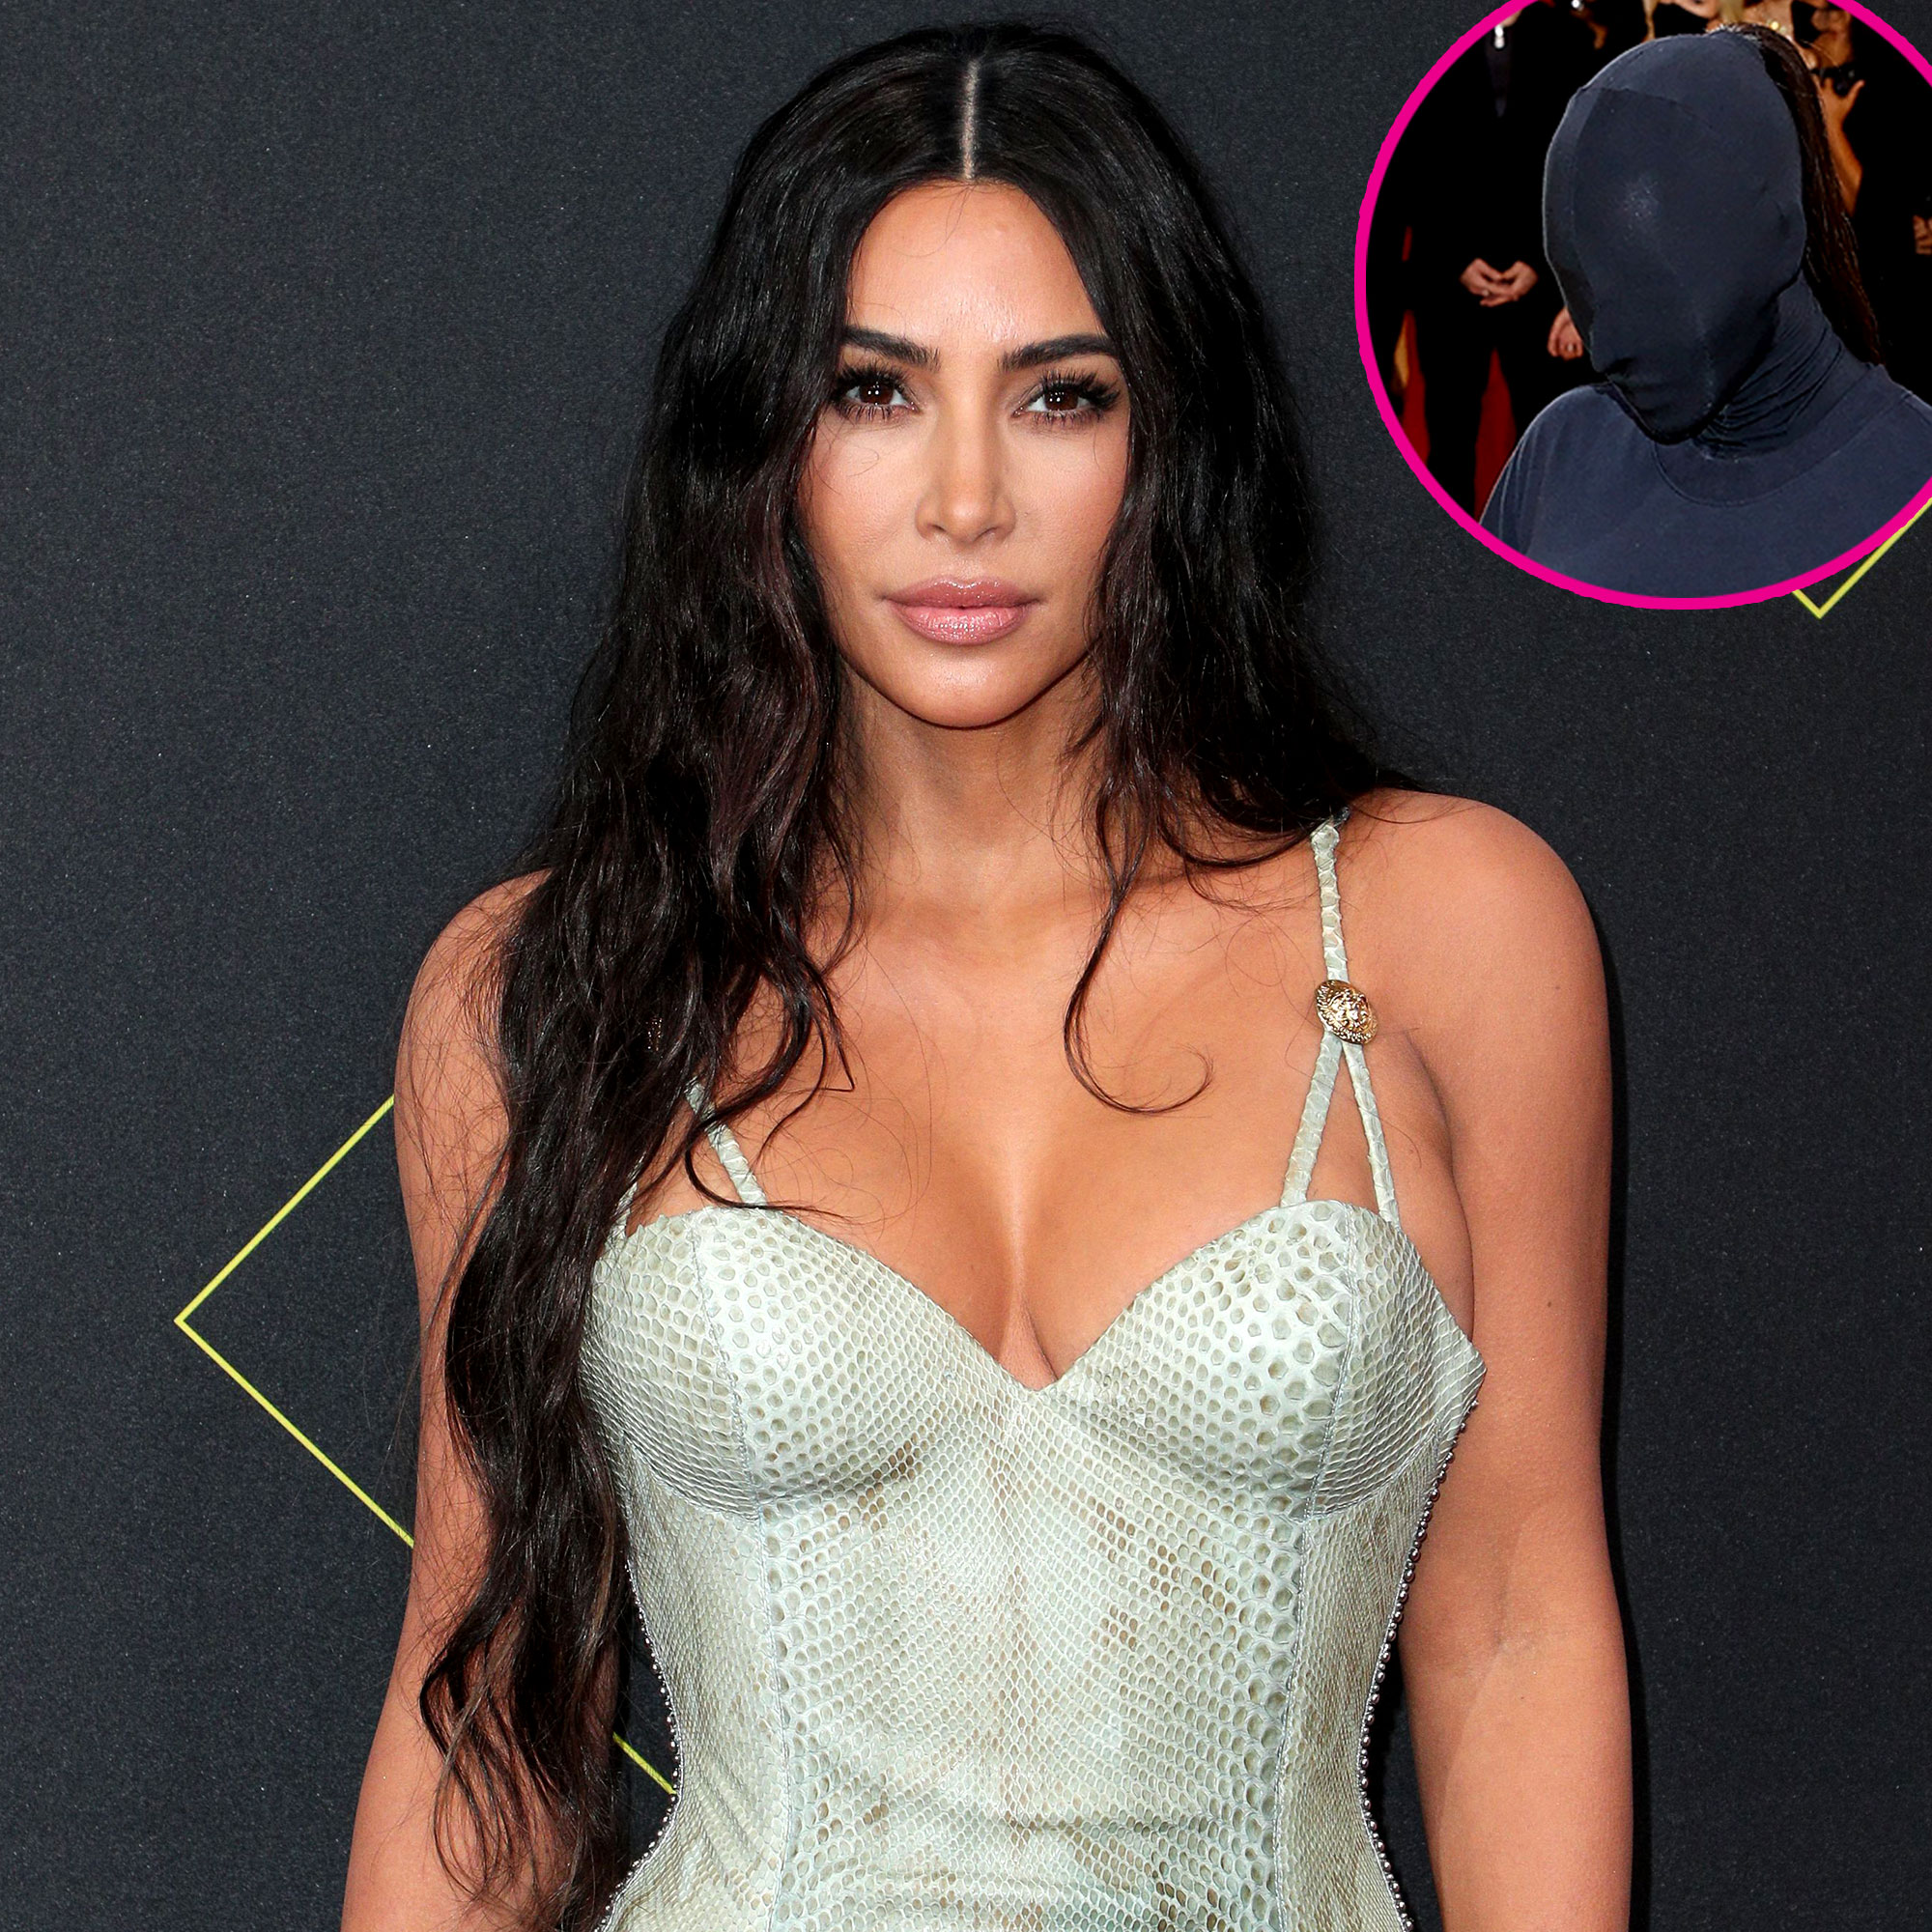 Kim Kardashian showed off the most amount of cleavage in a super low-cut  dress